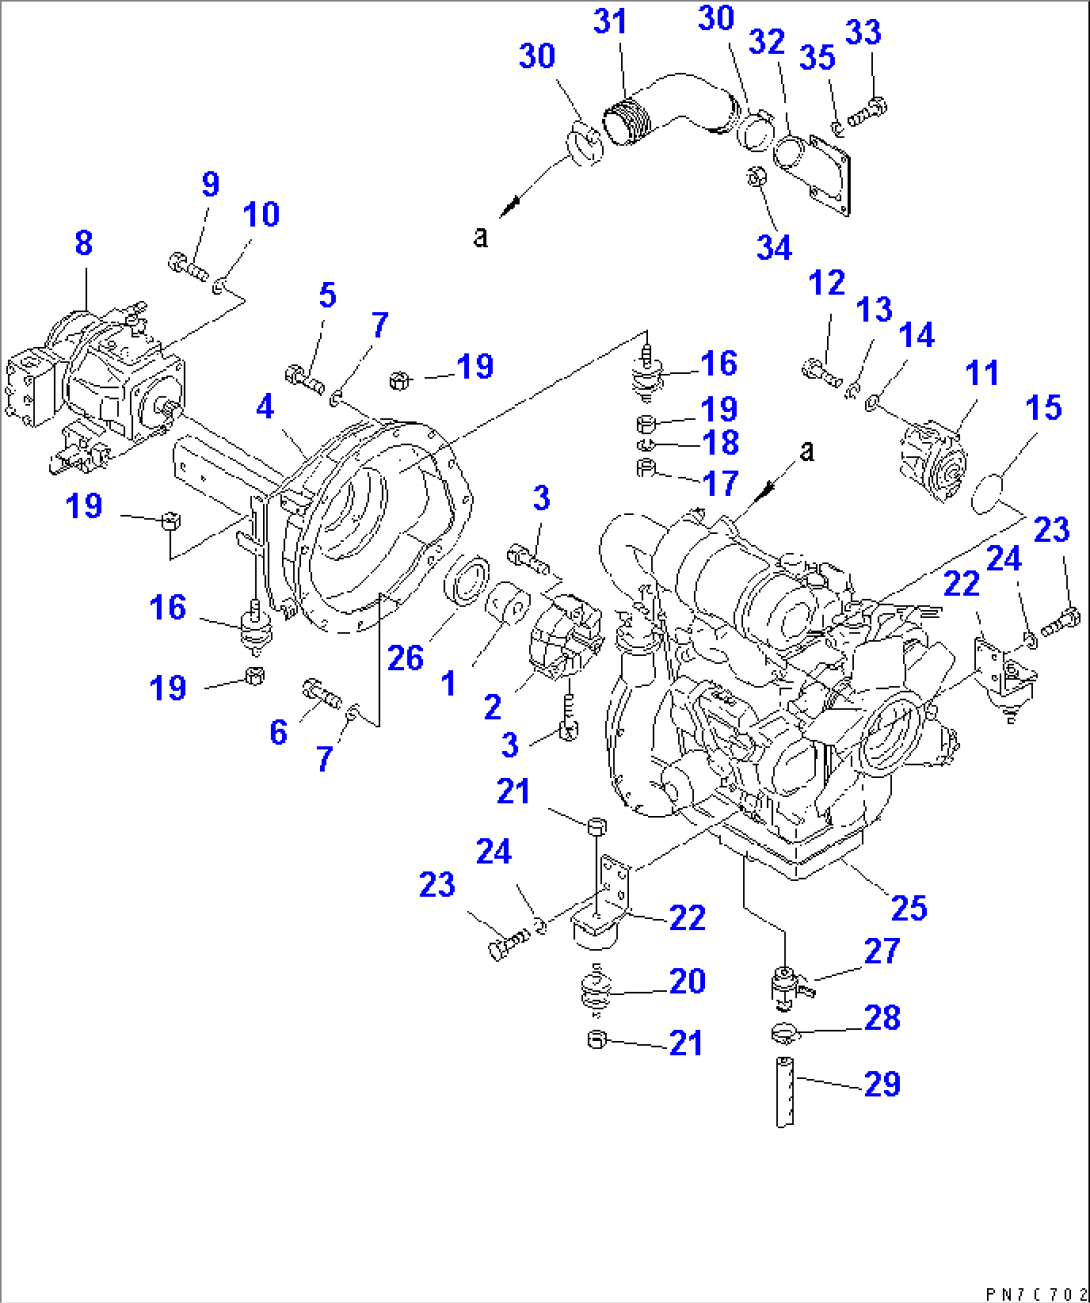 ENGINE AND PUMP MOUNTING PARTS(#1232-)